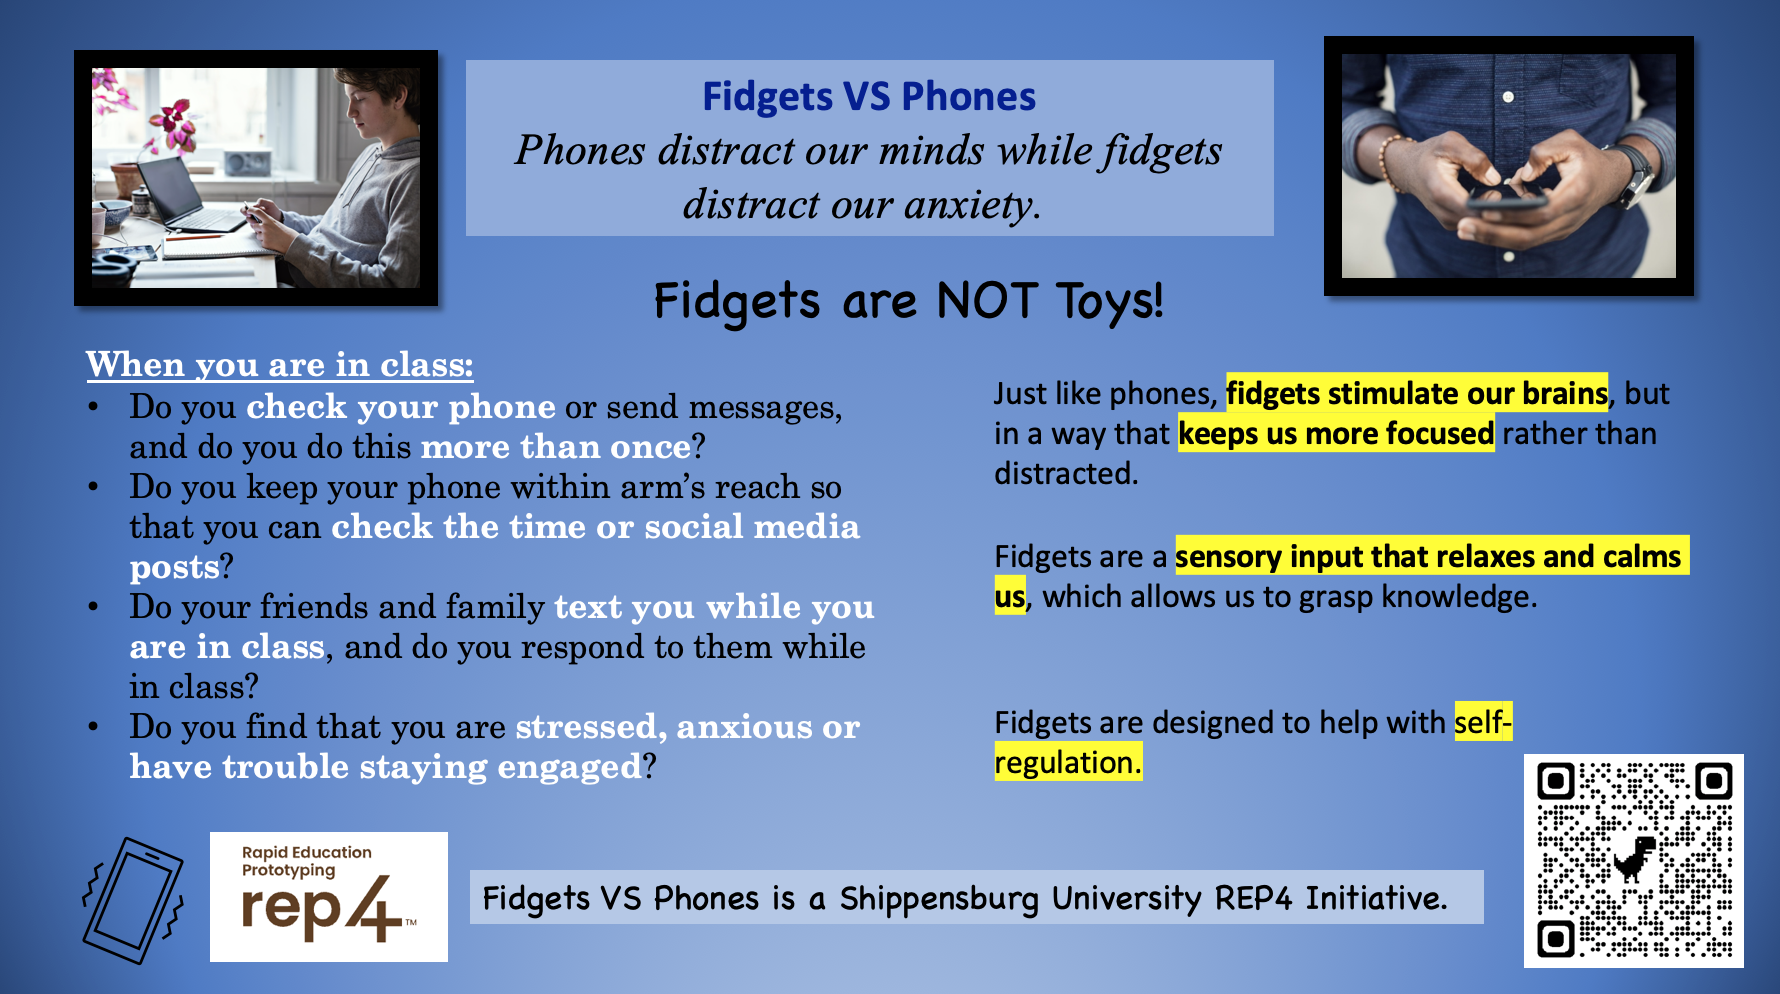 Fidget are not toys